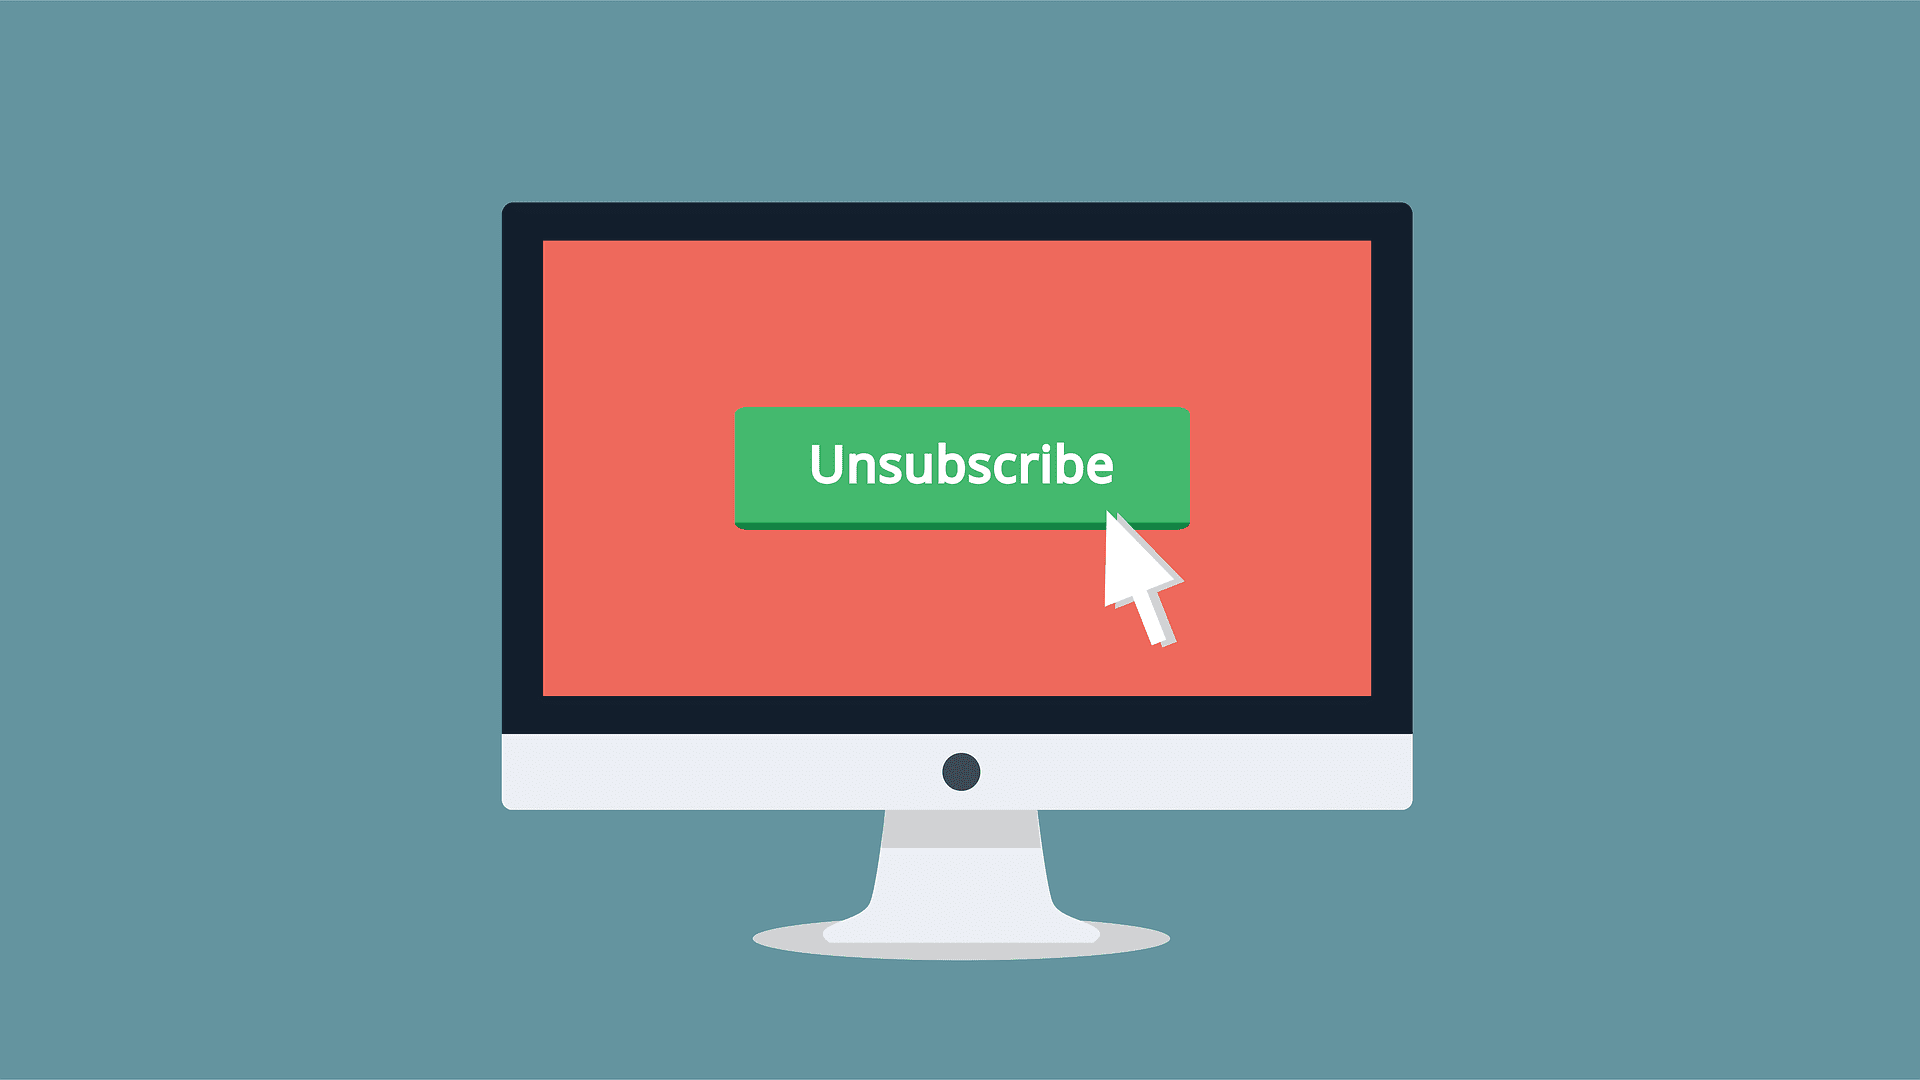 Keep consumers from unsubscribing